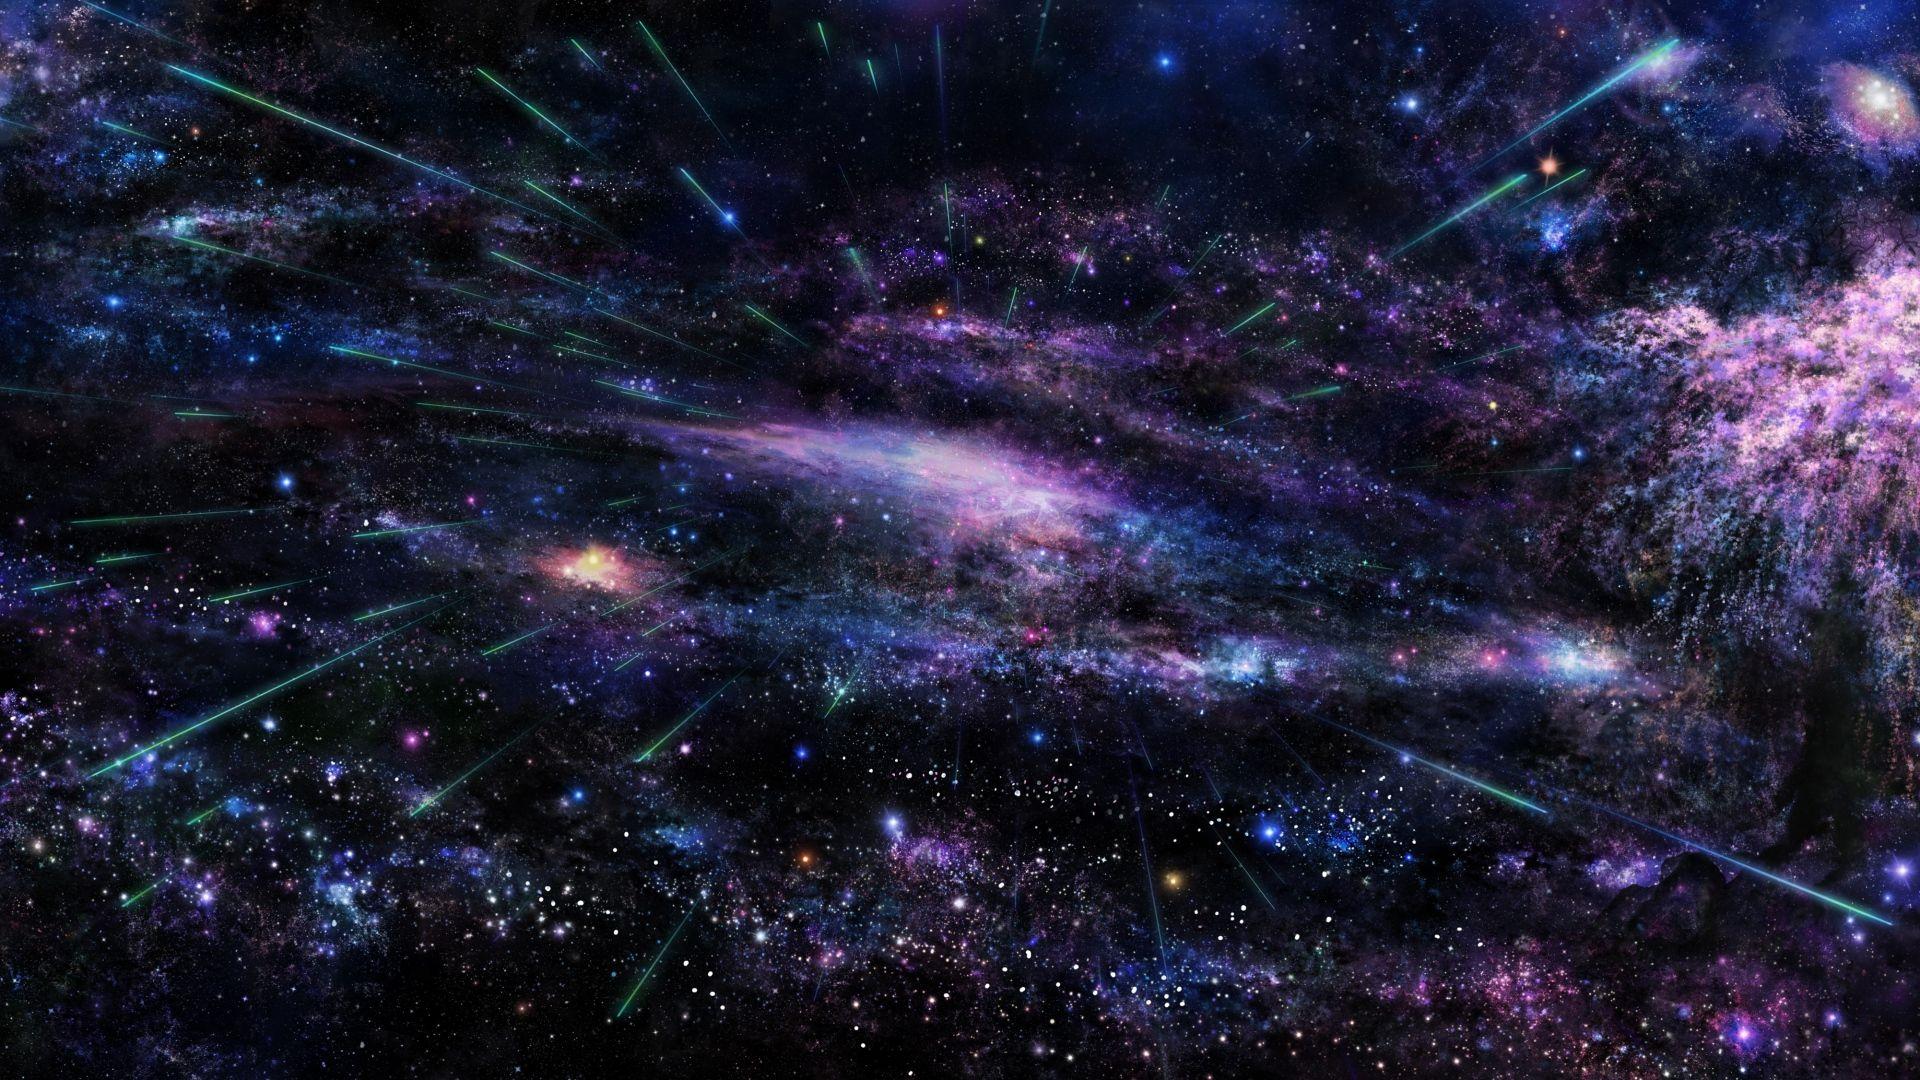 trippy space wallpapers hd iphone